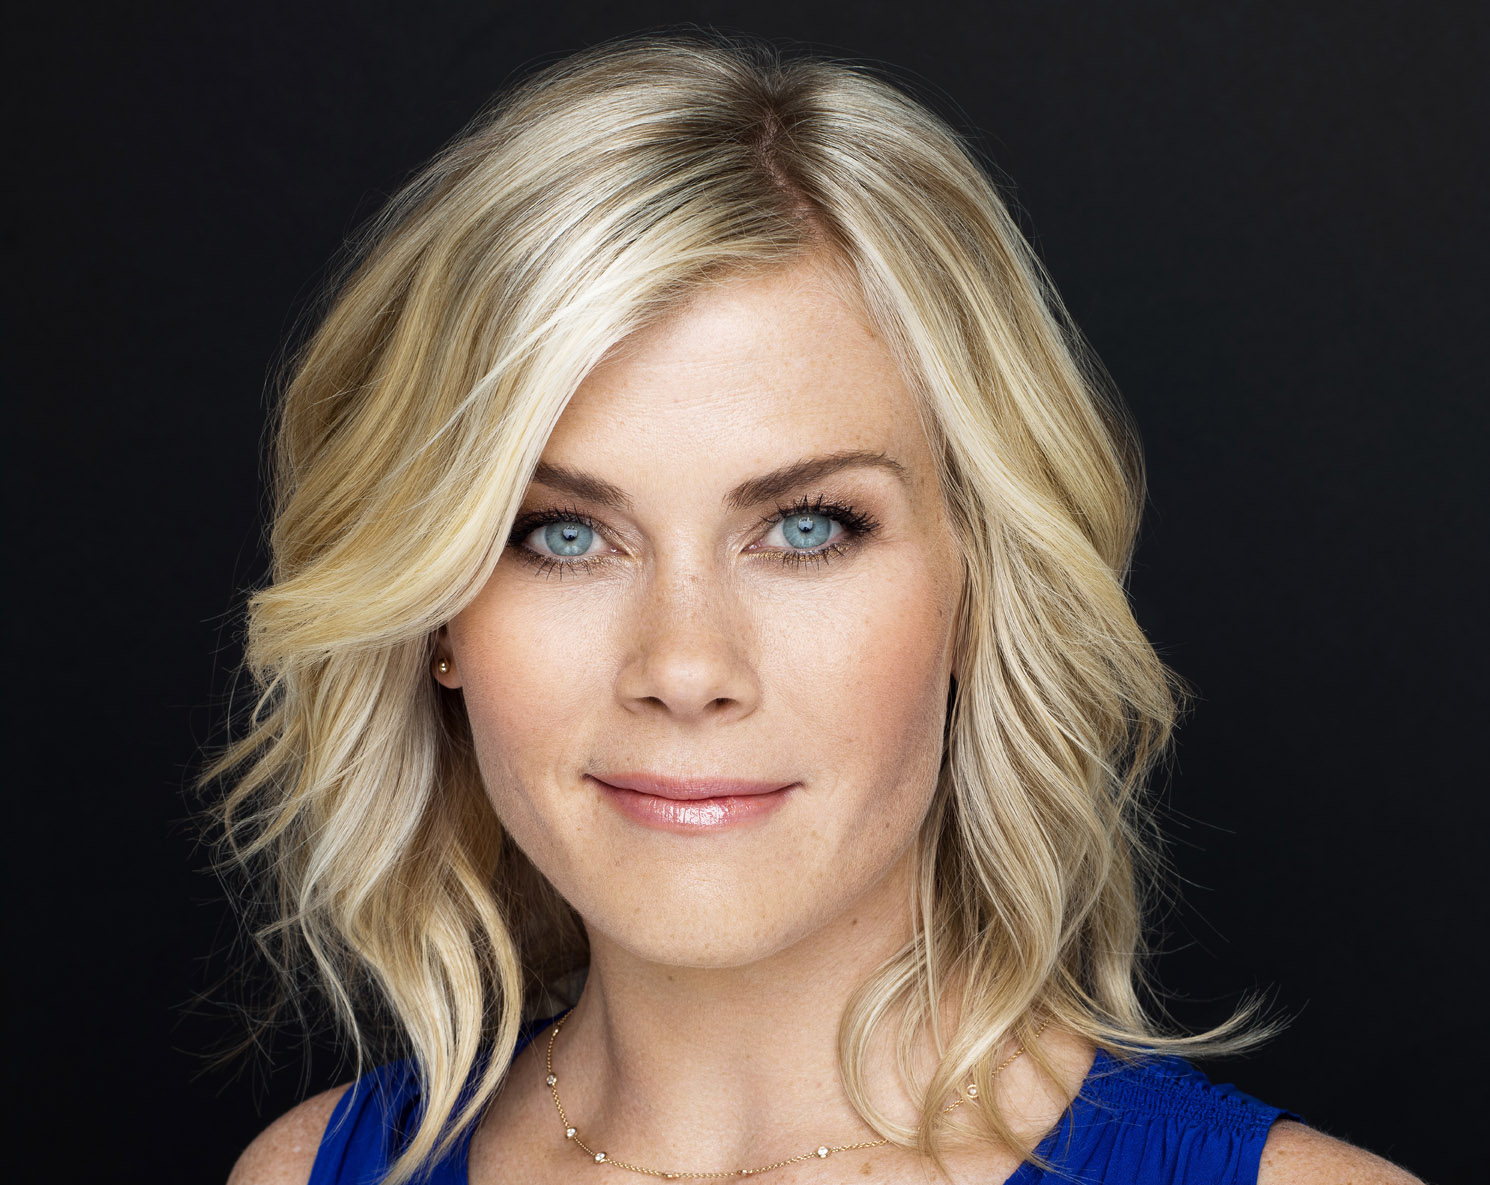 Alison Sweeney with a blonde hair, blue eyes, and blue dress